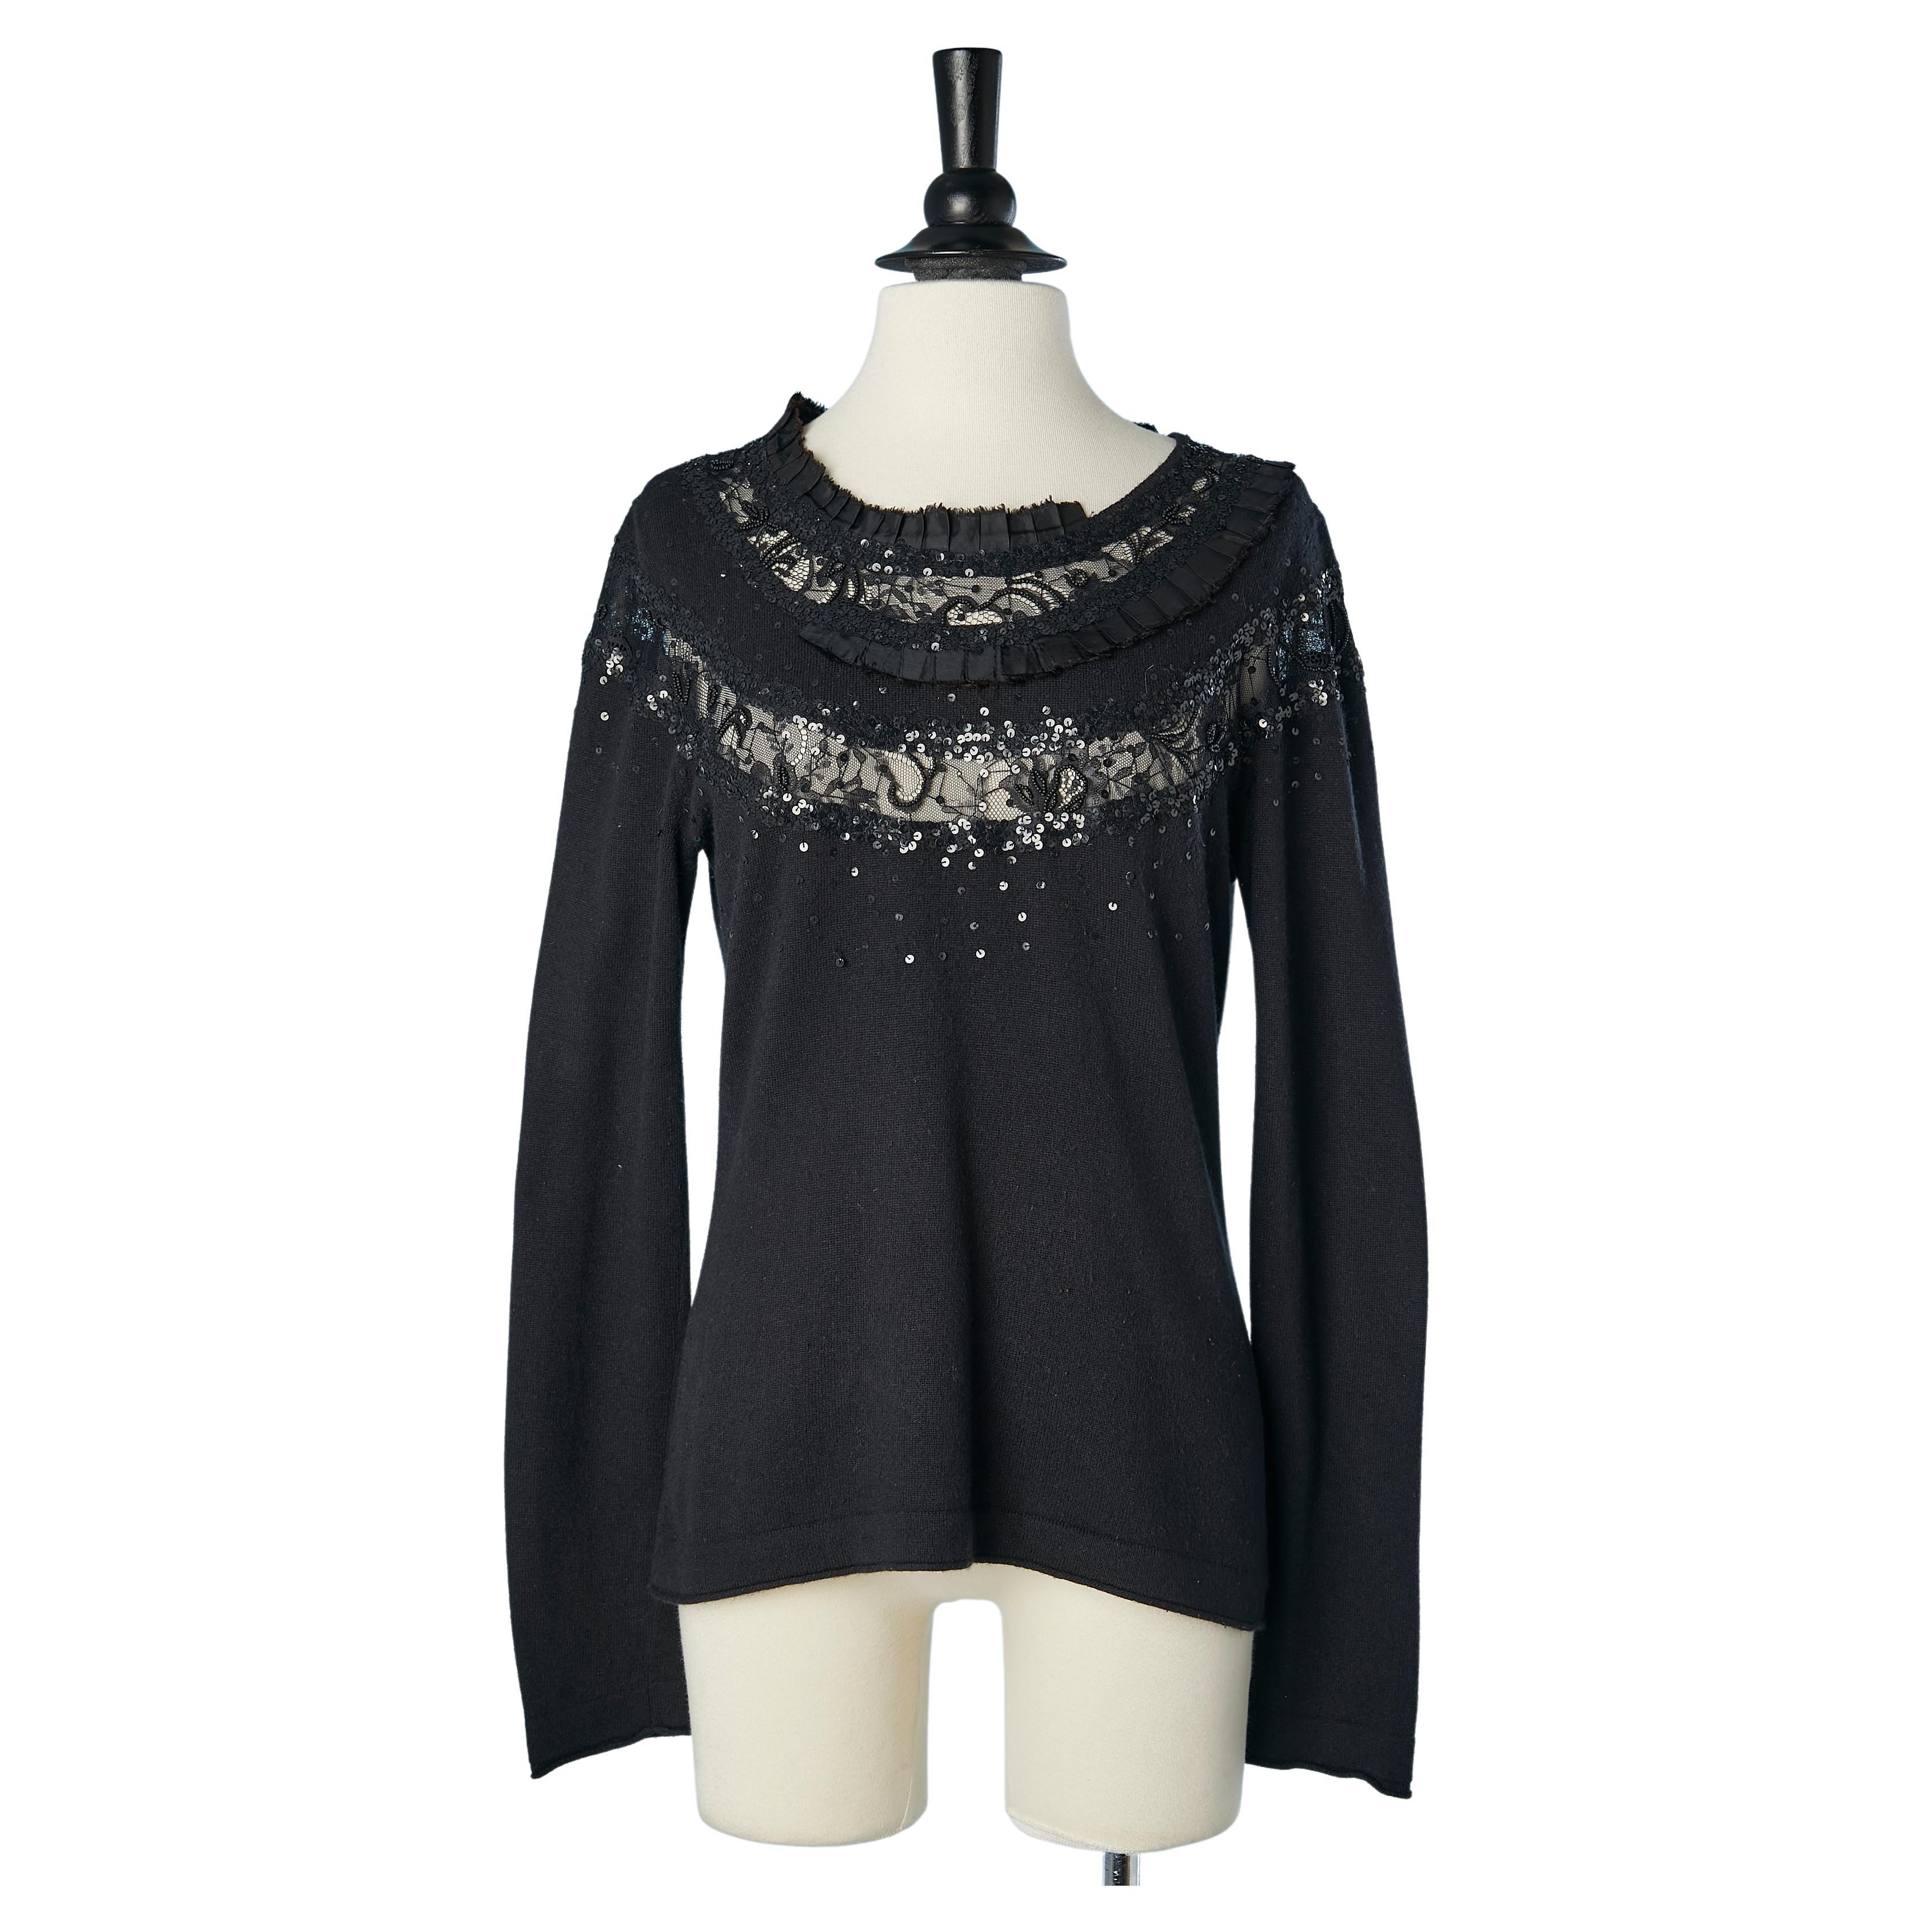 Black evening sweater with lace and embroideries Christian Lacroix Bazar 